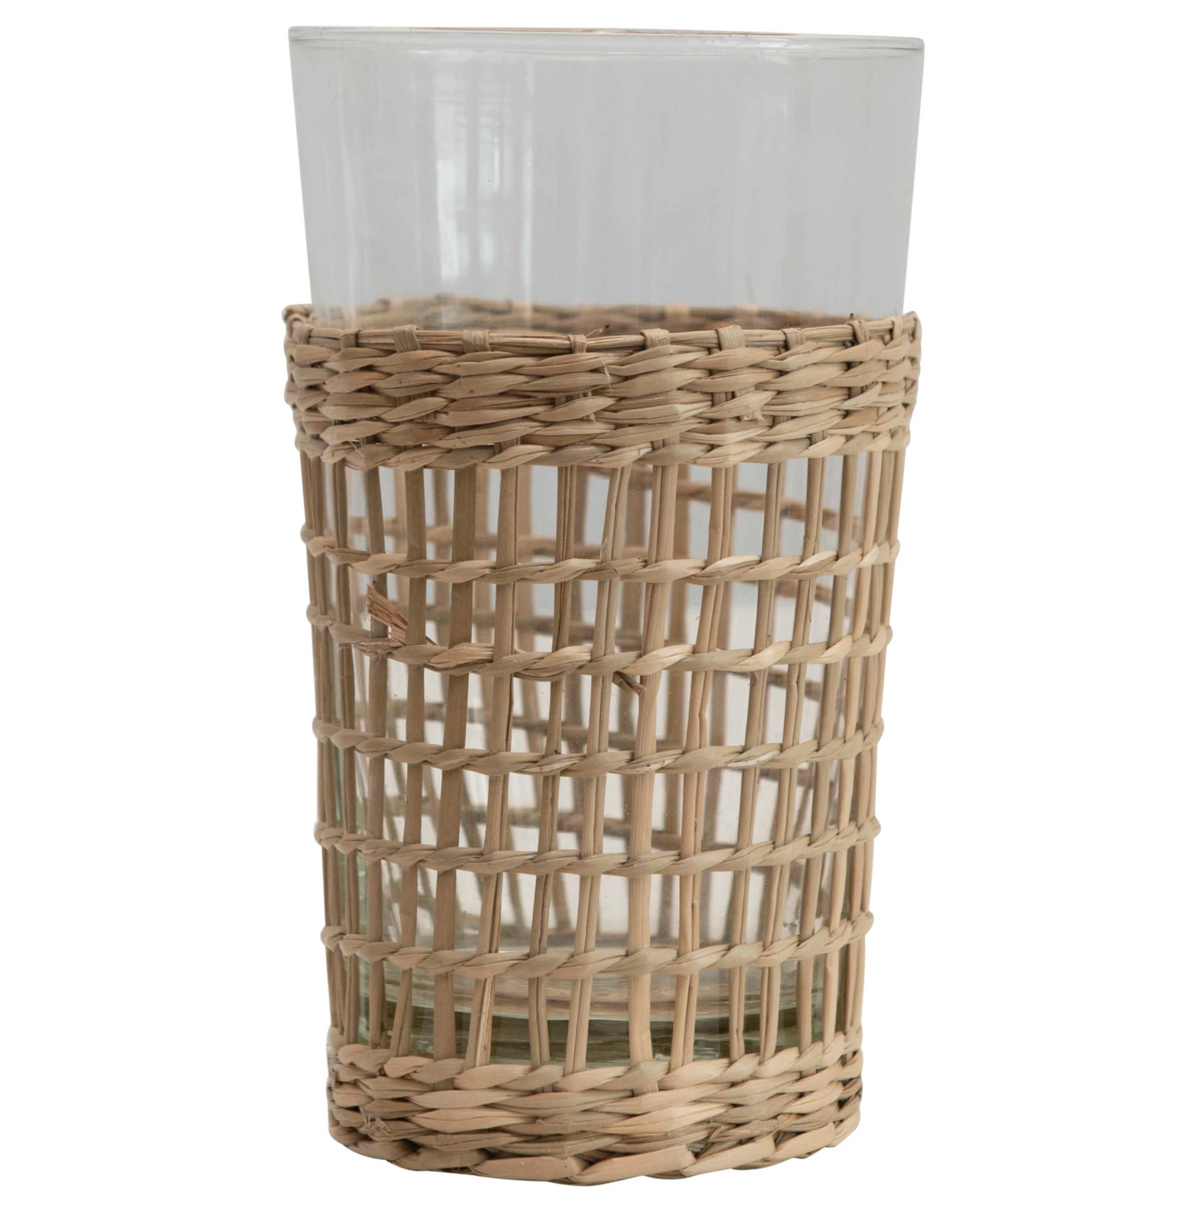 Sulu Drinking Glass With Woven Seagrass Sleeve - Holistic Habitat 